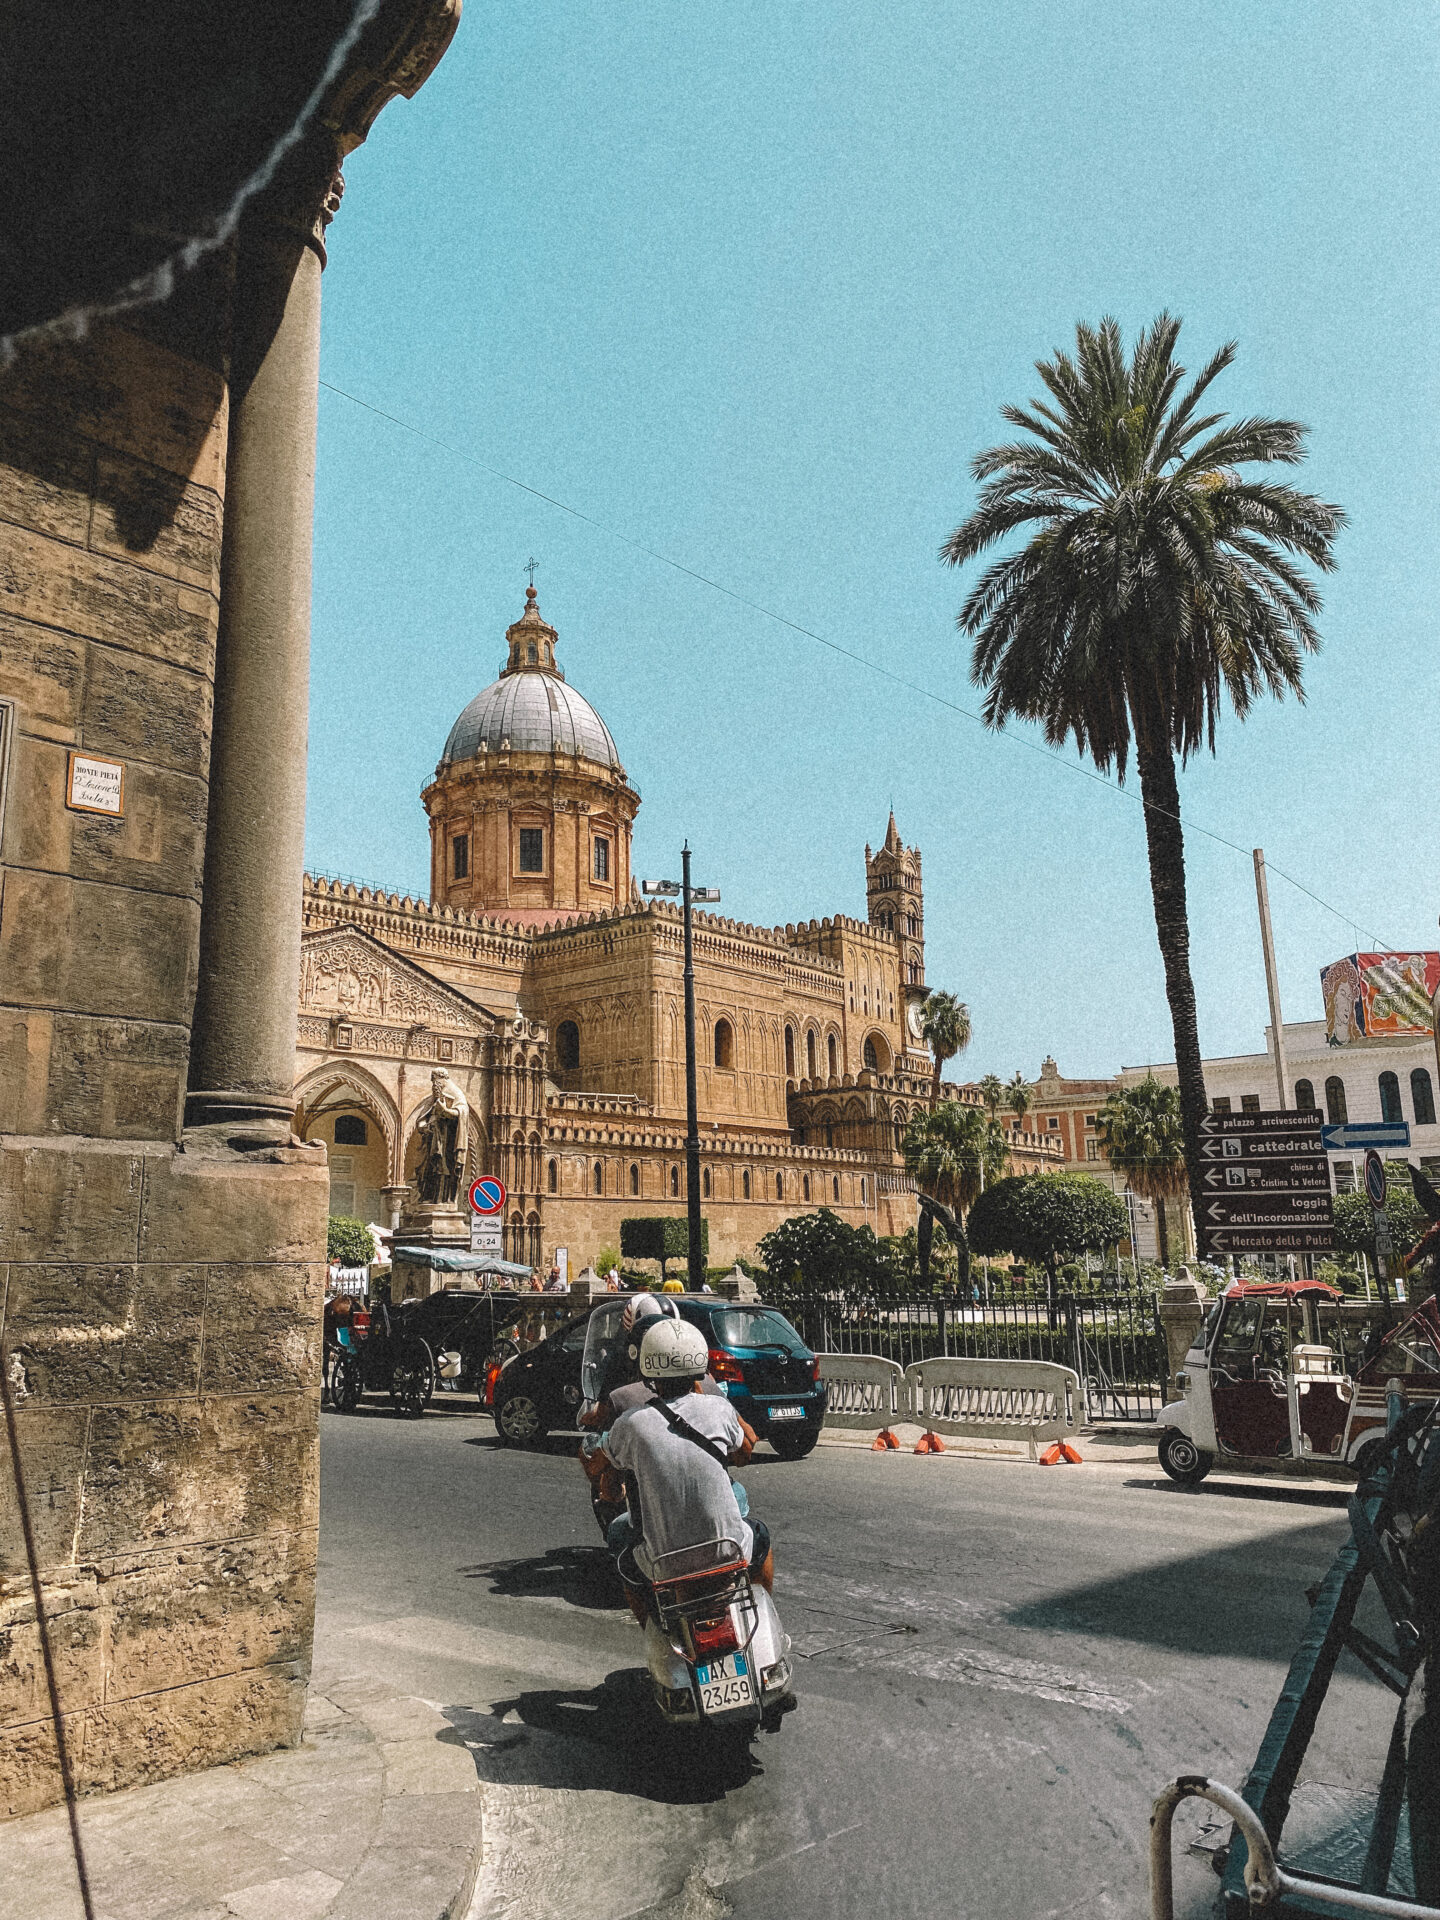 3 Hours in Palermo